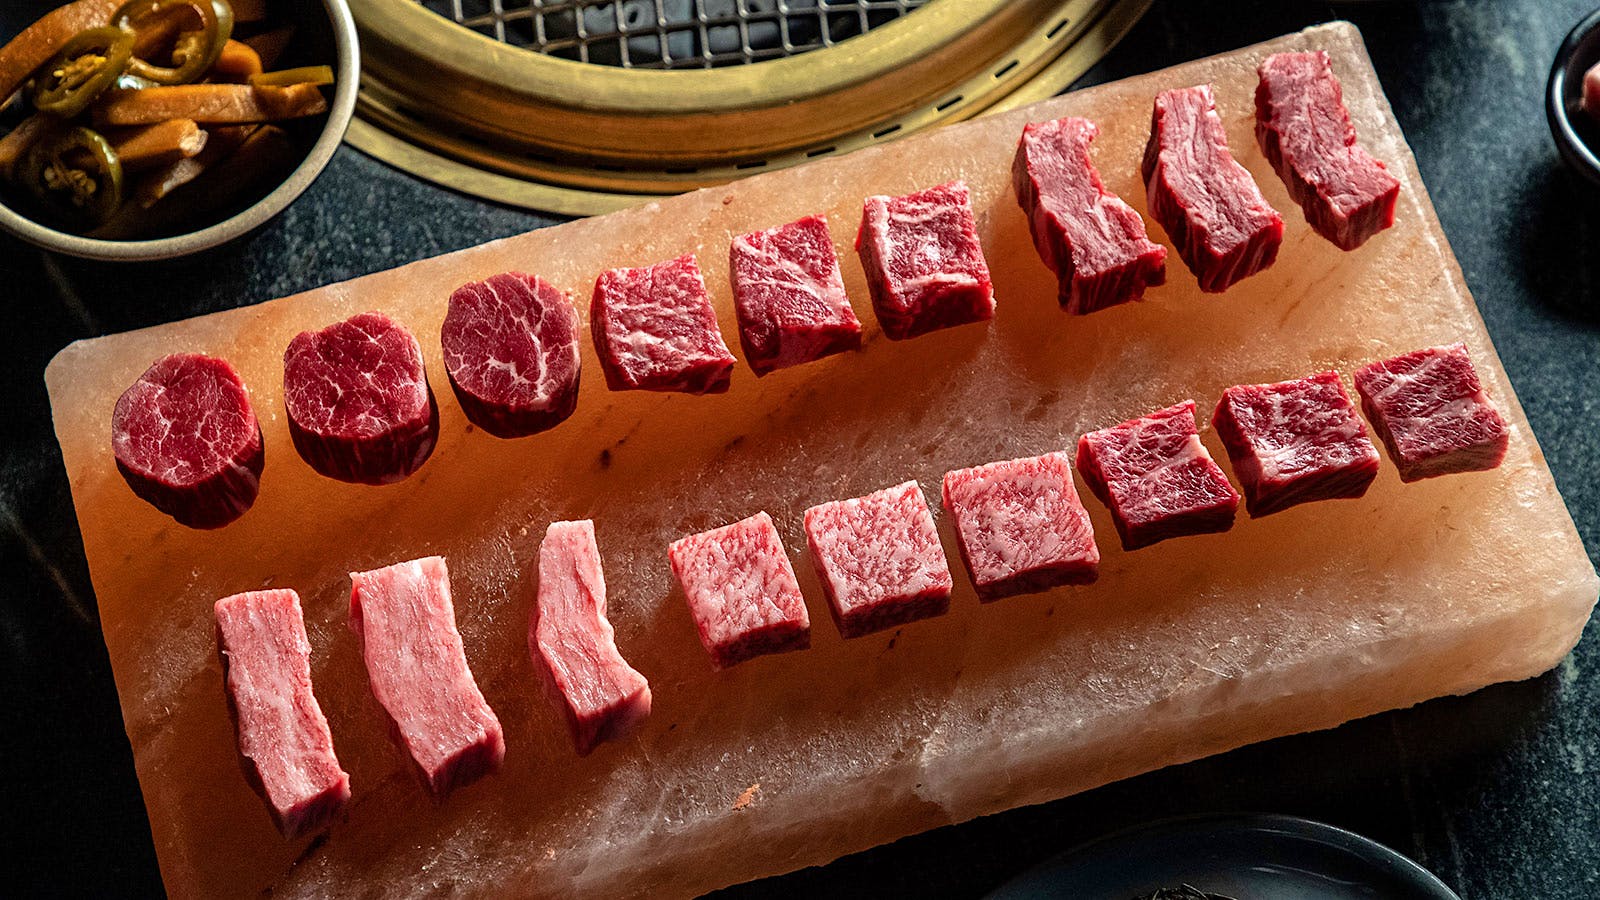 Small pieces of meat ready to be cooked on the signature grill at Cote Korean Steakhouse